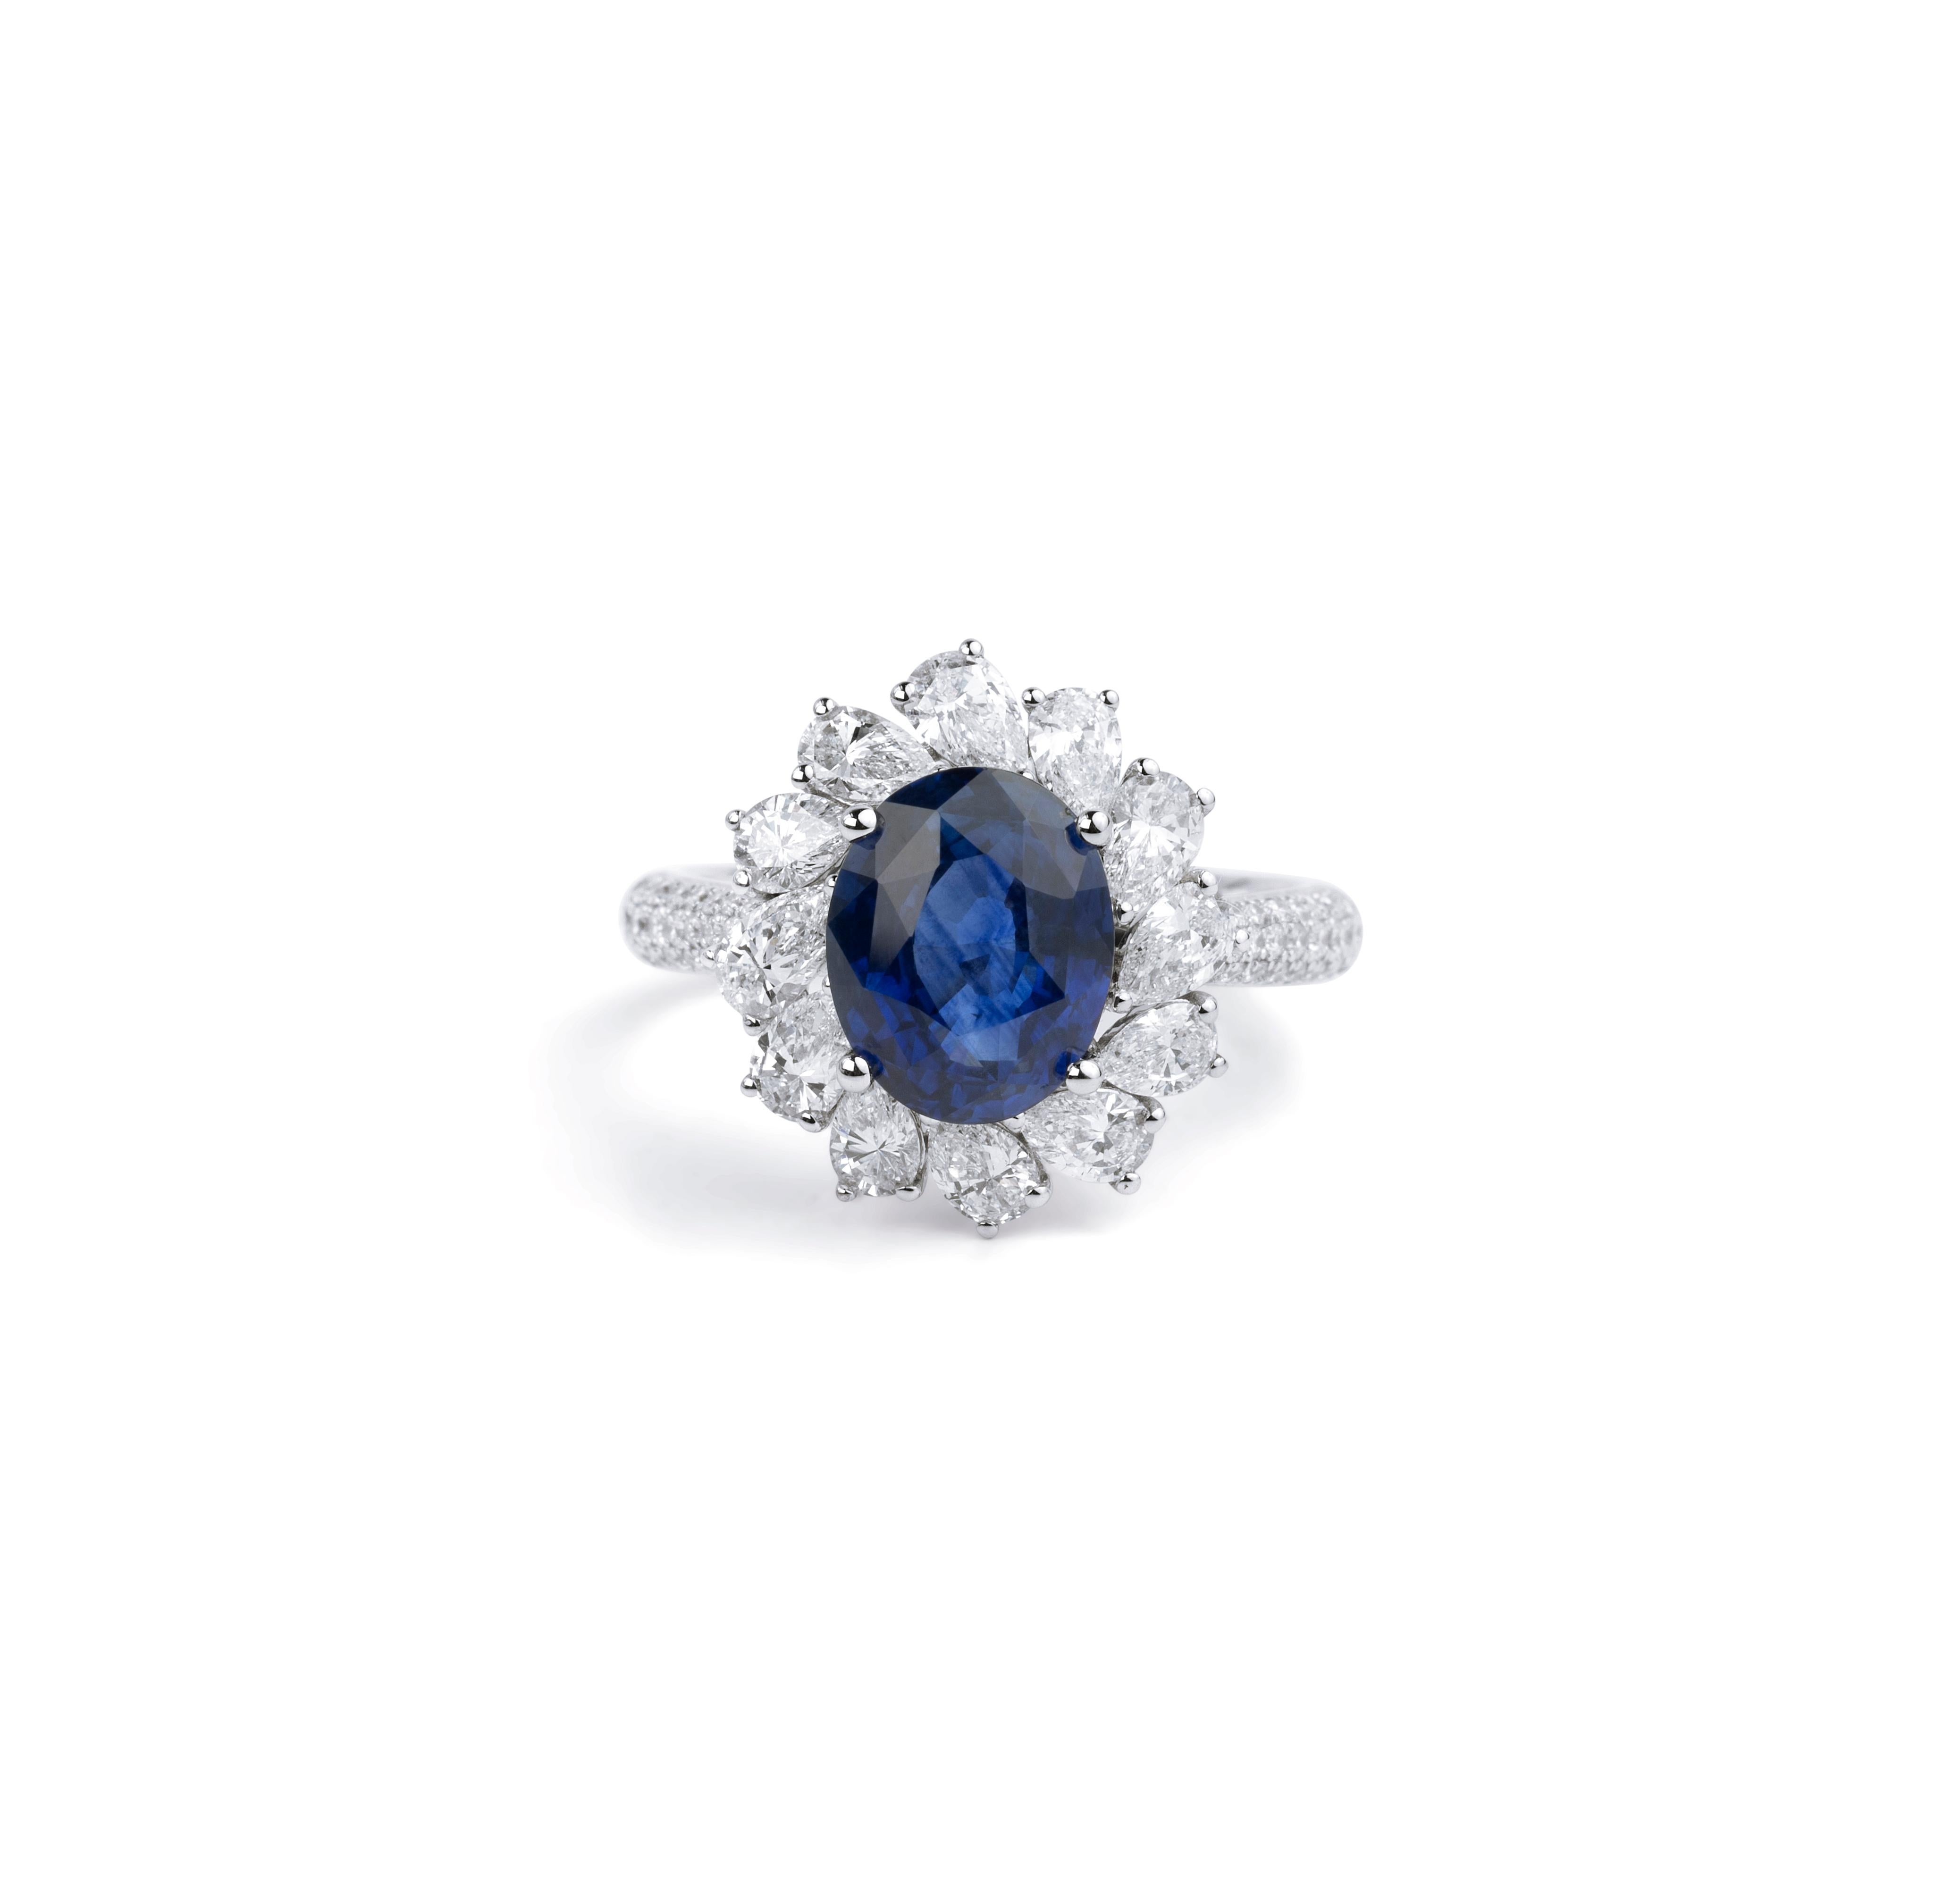 3 Carat Natural Sapphire Diamond Pear Halo Cocktail Engagement Ring 18k Gold

Available in 18k white gold.

Same design can be made also with other custom gemstones per request.

Product details:

- Solid gold

- Diamond - approx. 1.71 carat

-